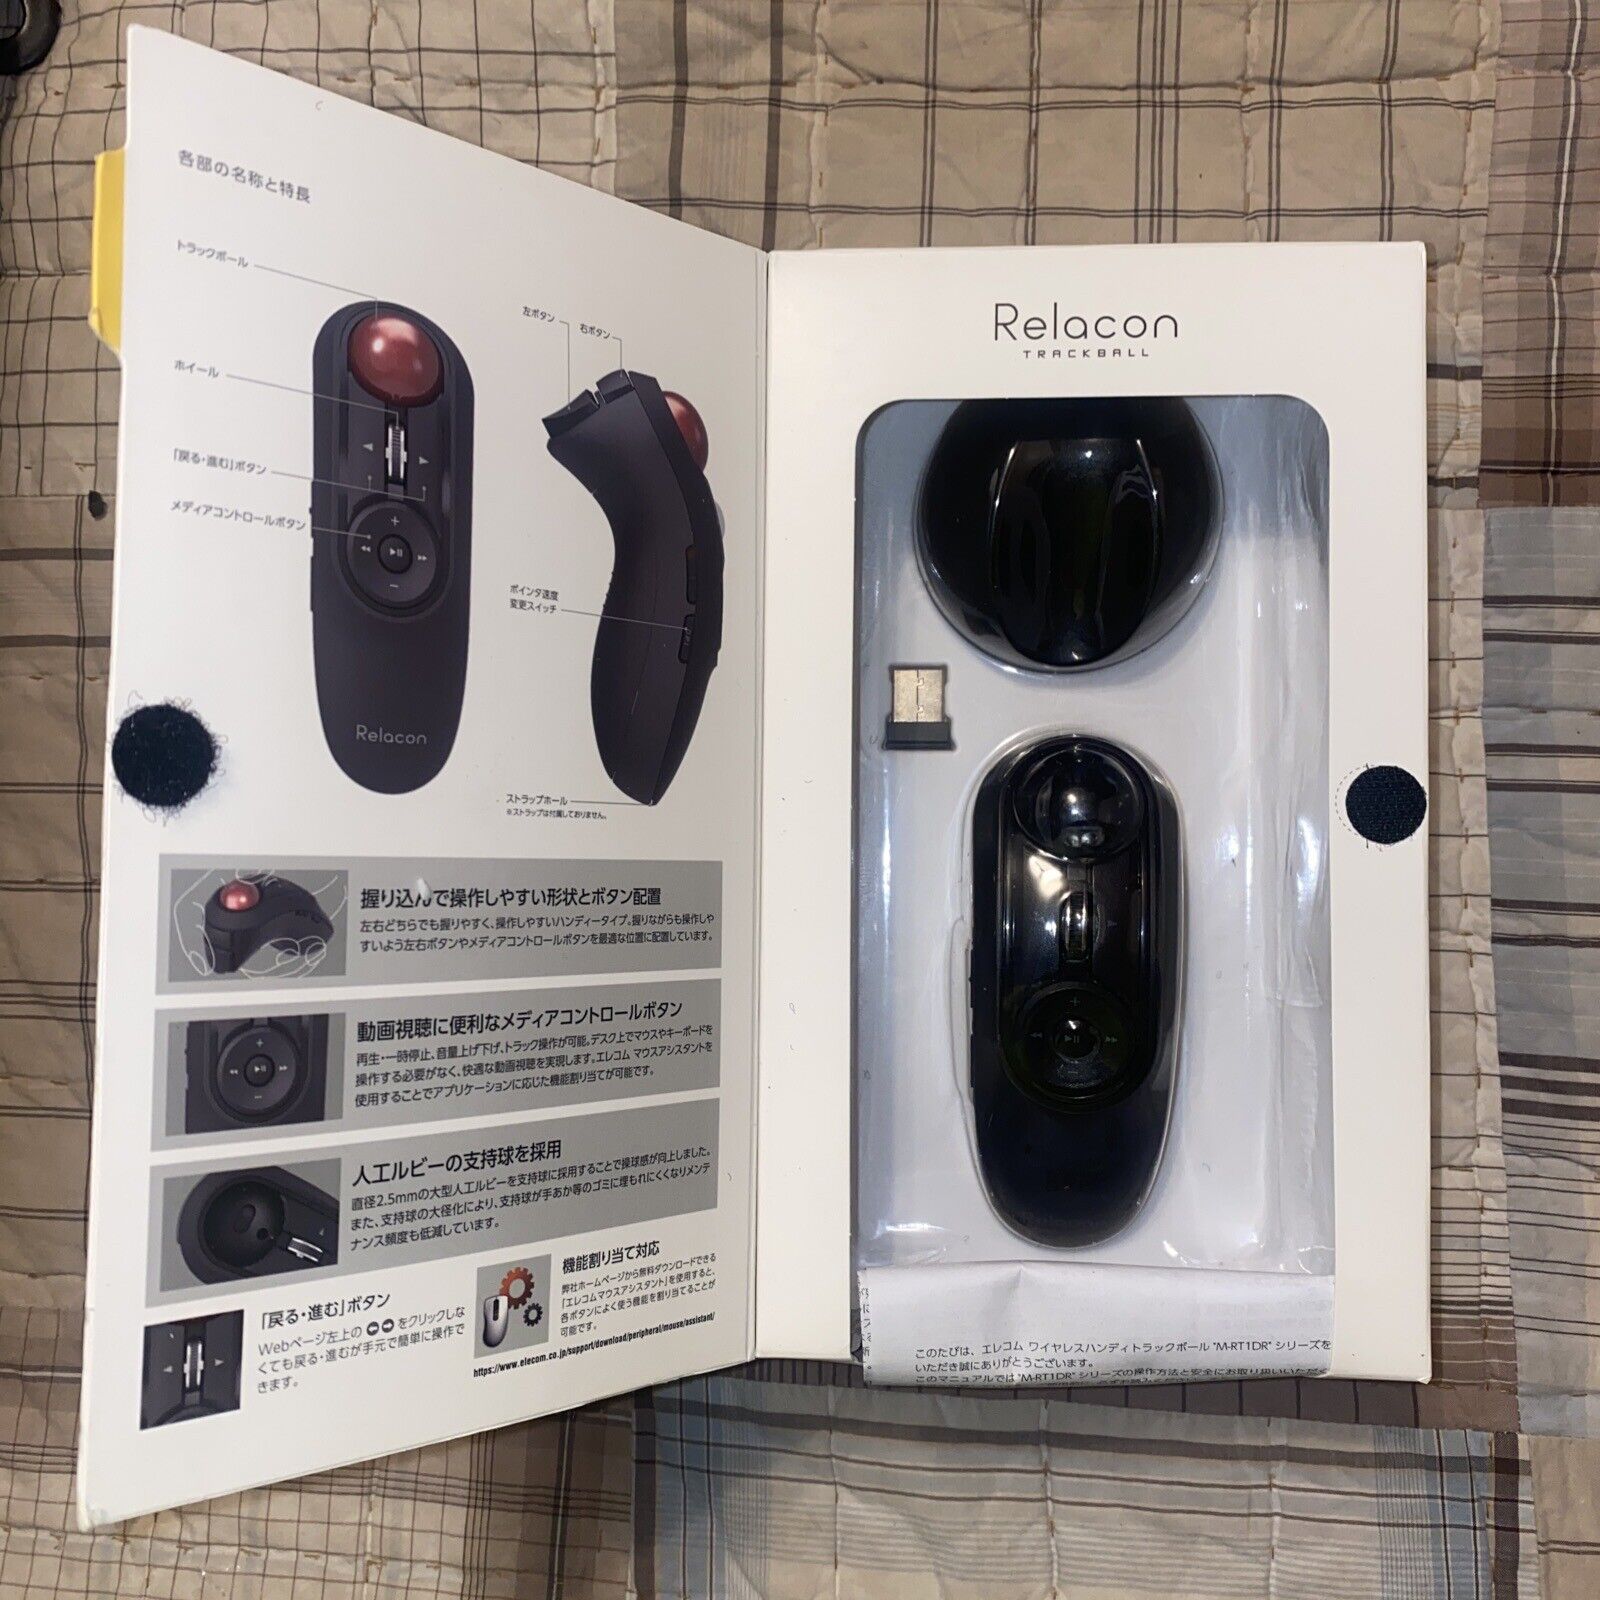 Handheld Trackball Mouse, Thumb Control, Left & Right Handed -Bluetooth, 10-But.